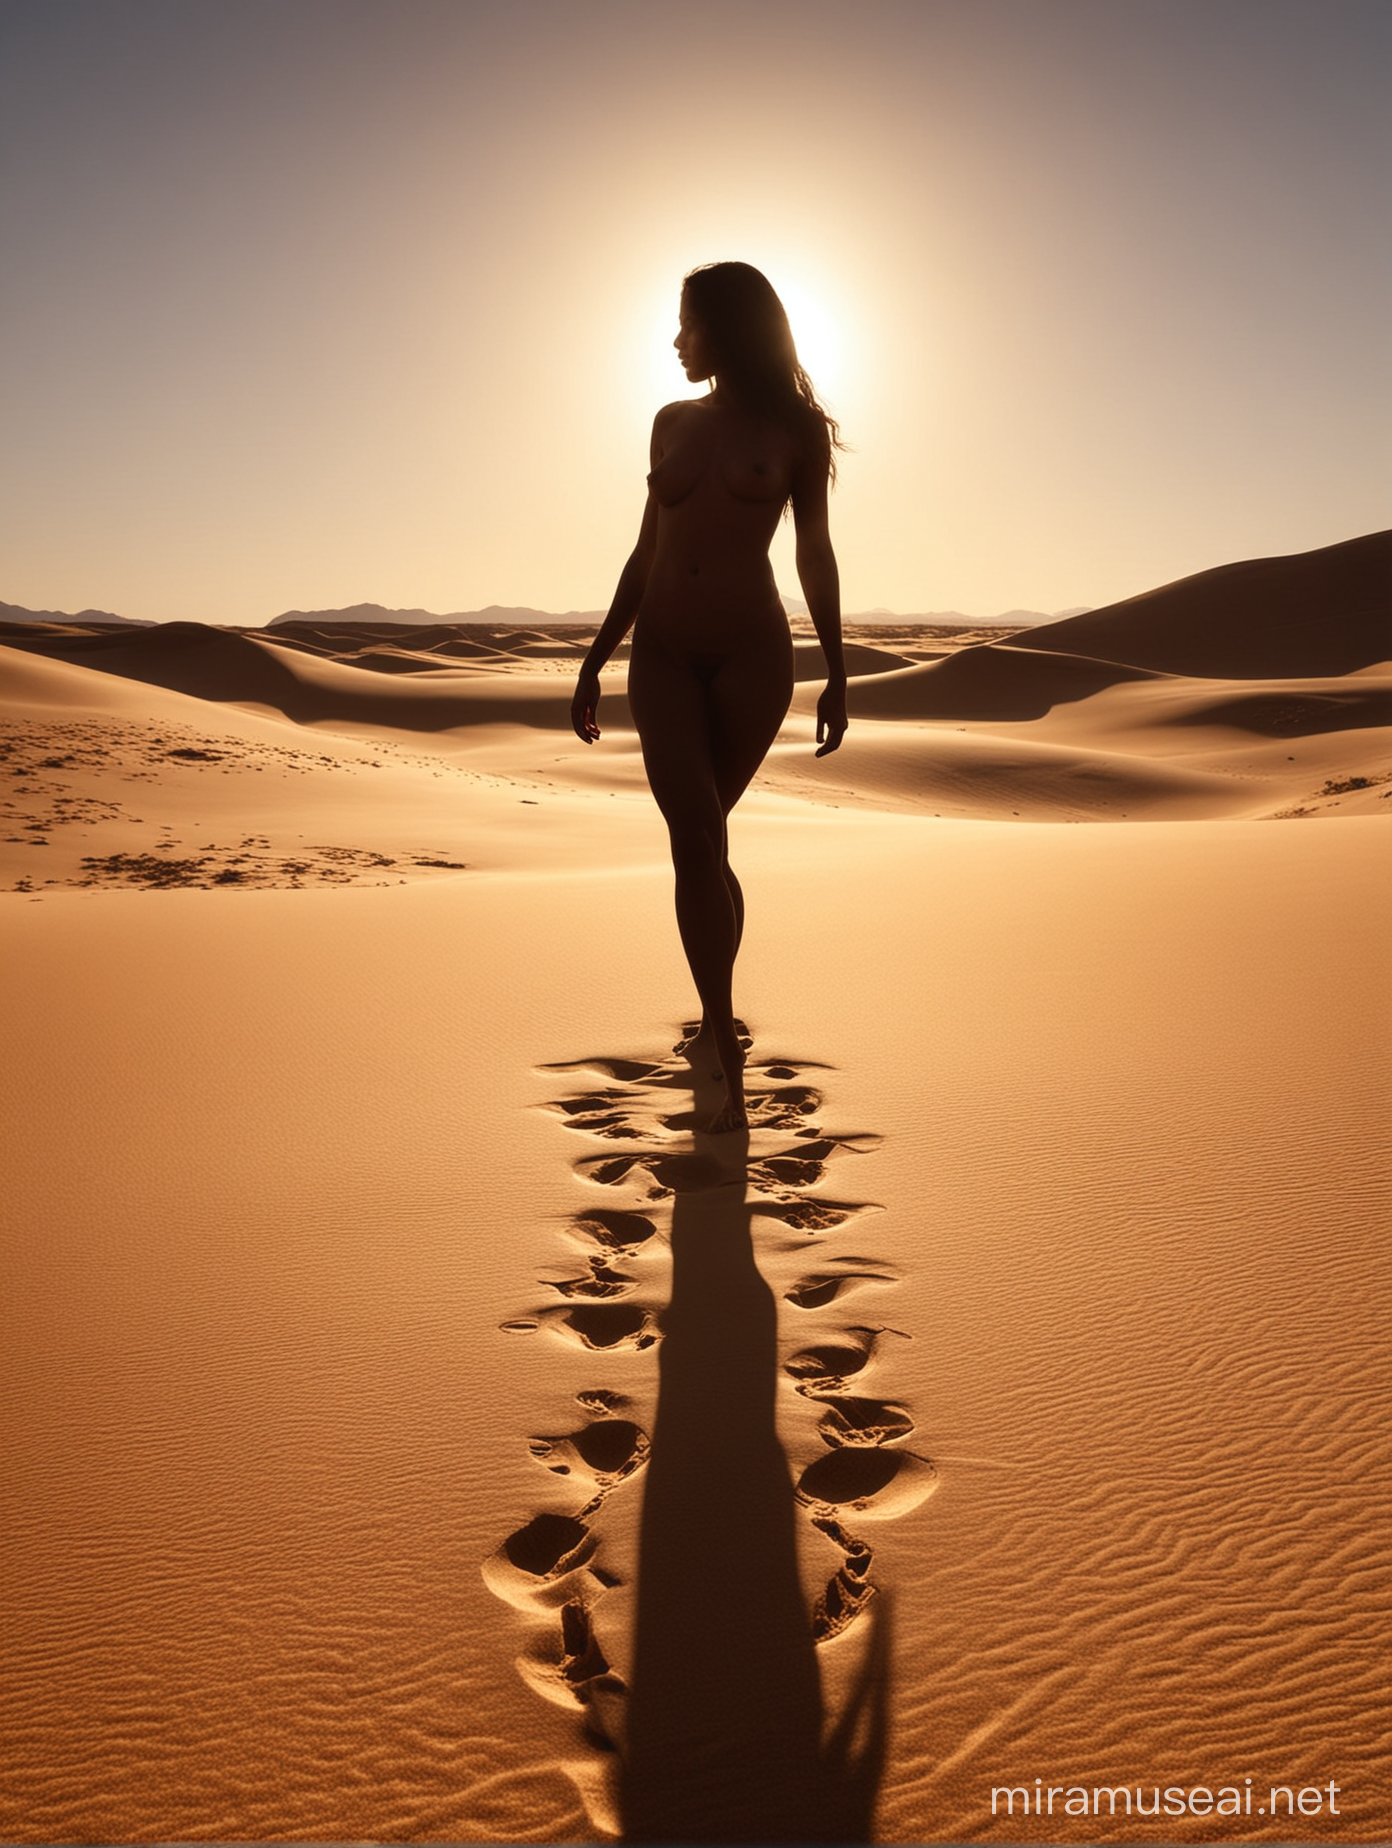 Silhouette of Nude Woman Standing on Desert Sand at Sunset